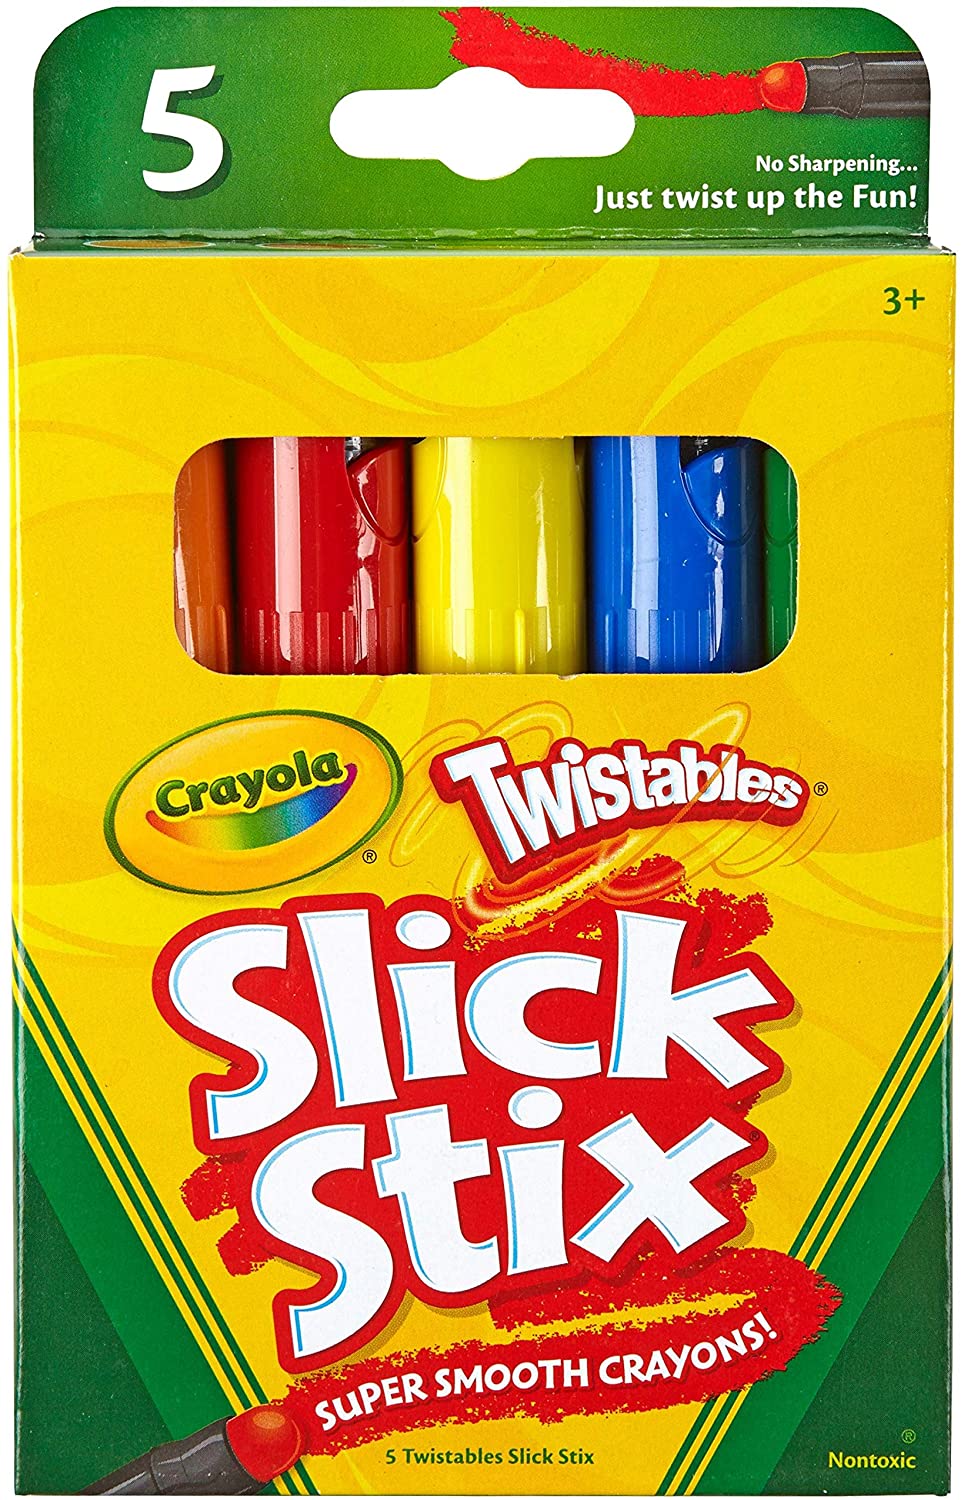  5 Pack Crayons